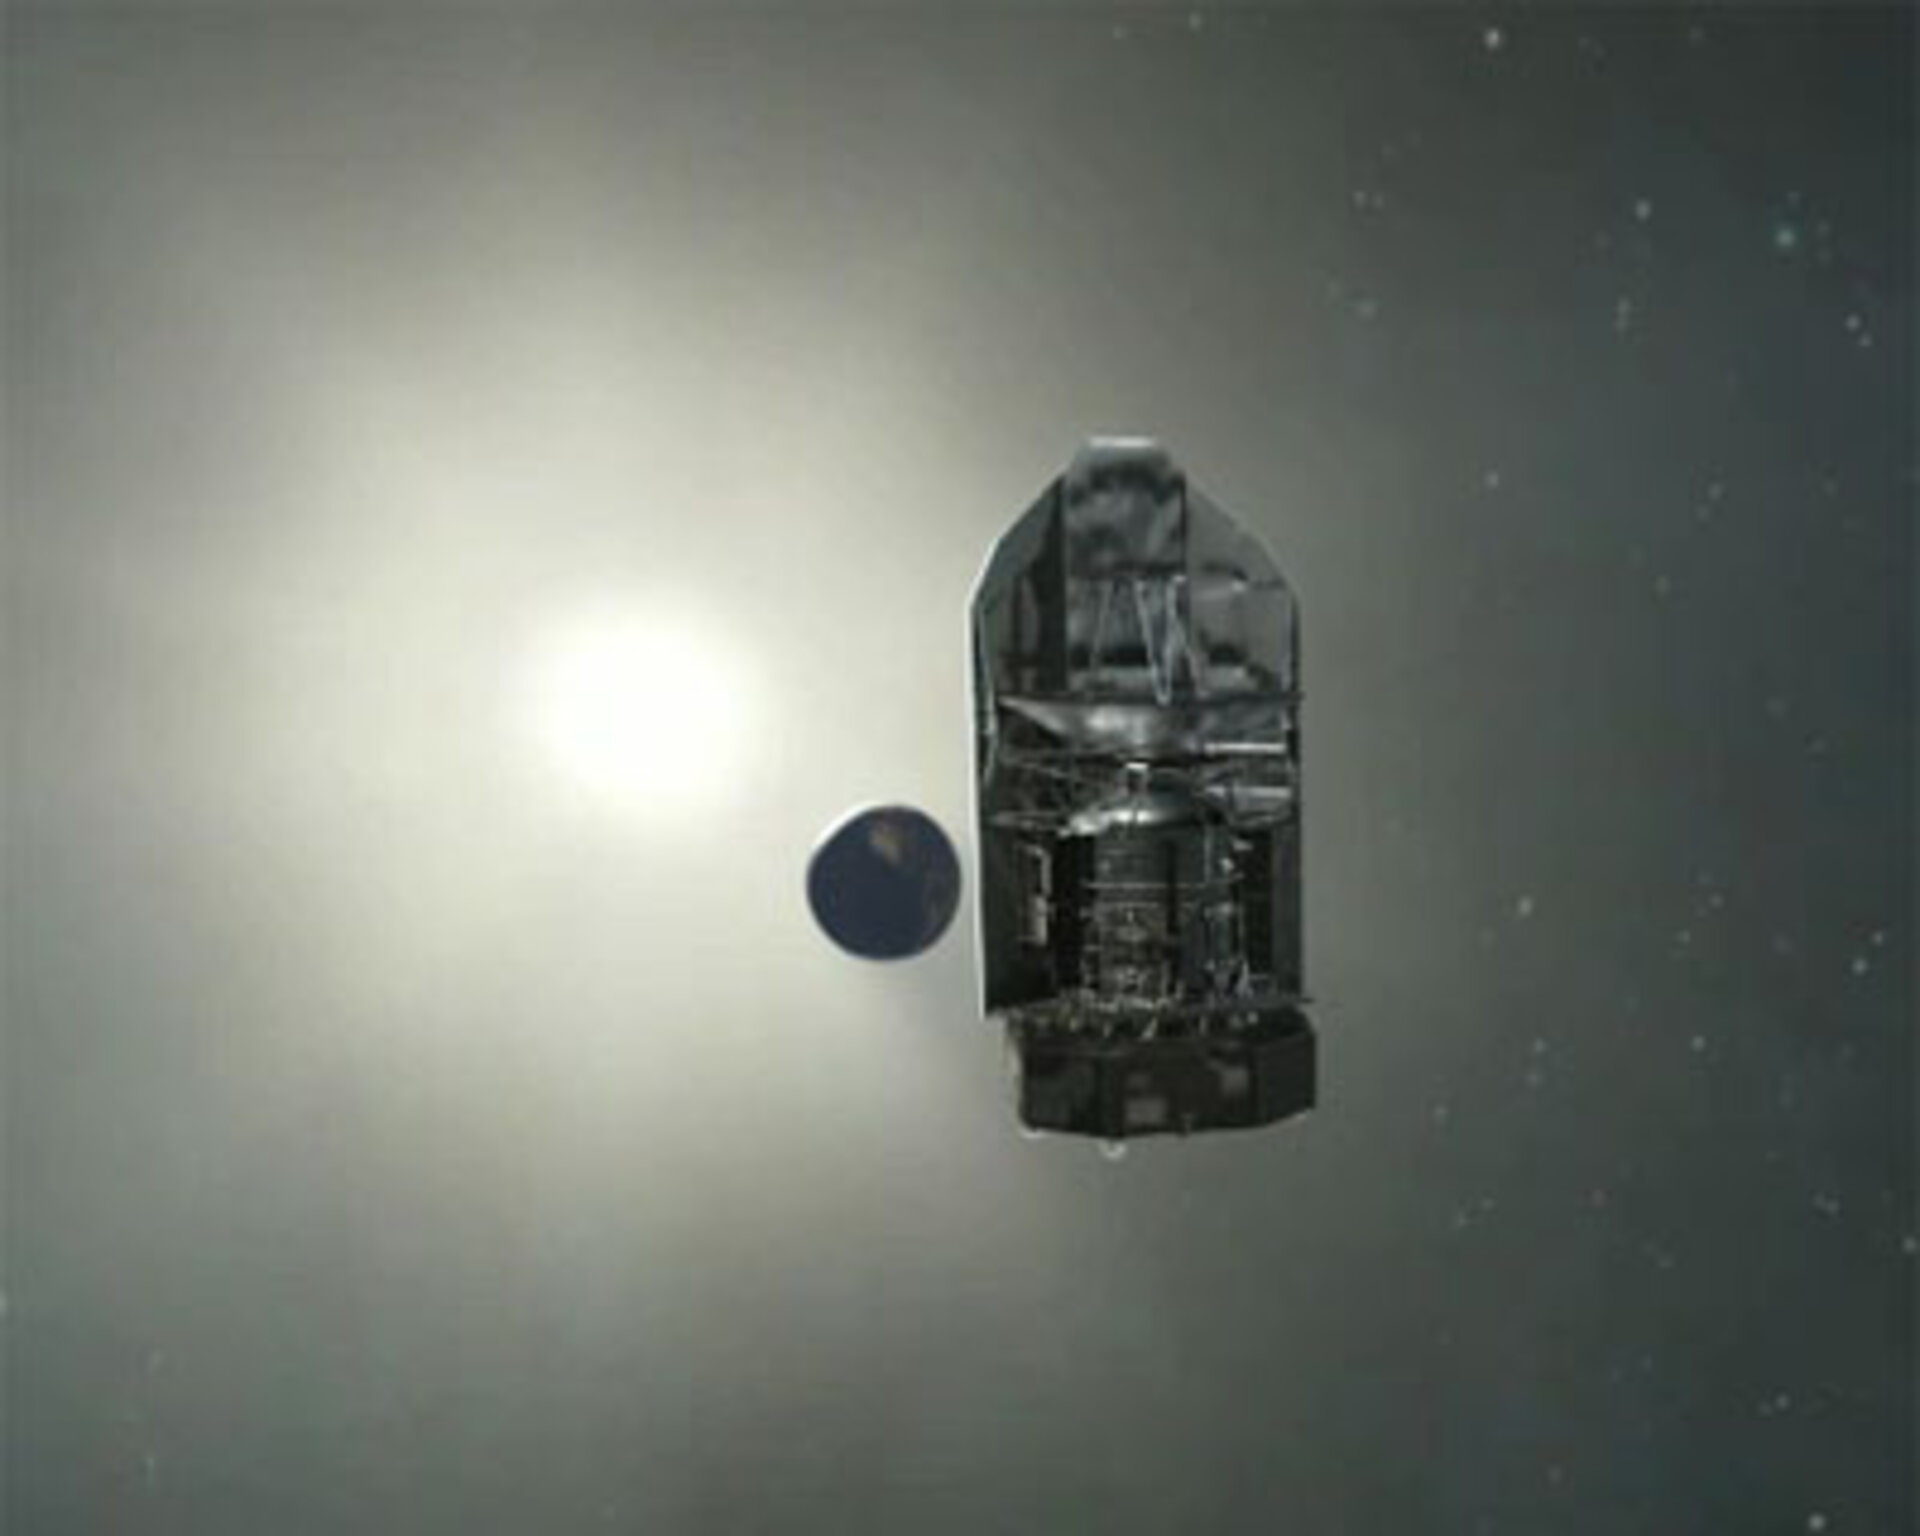 Sun, Earth and the spacecraft are aligned